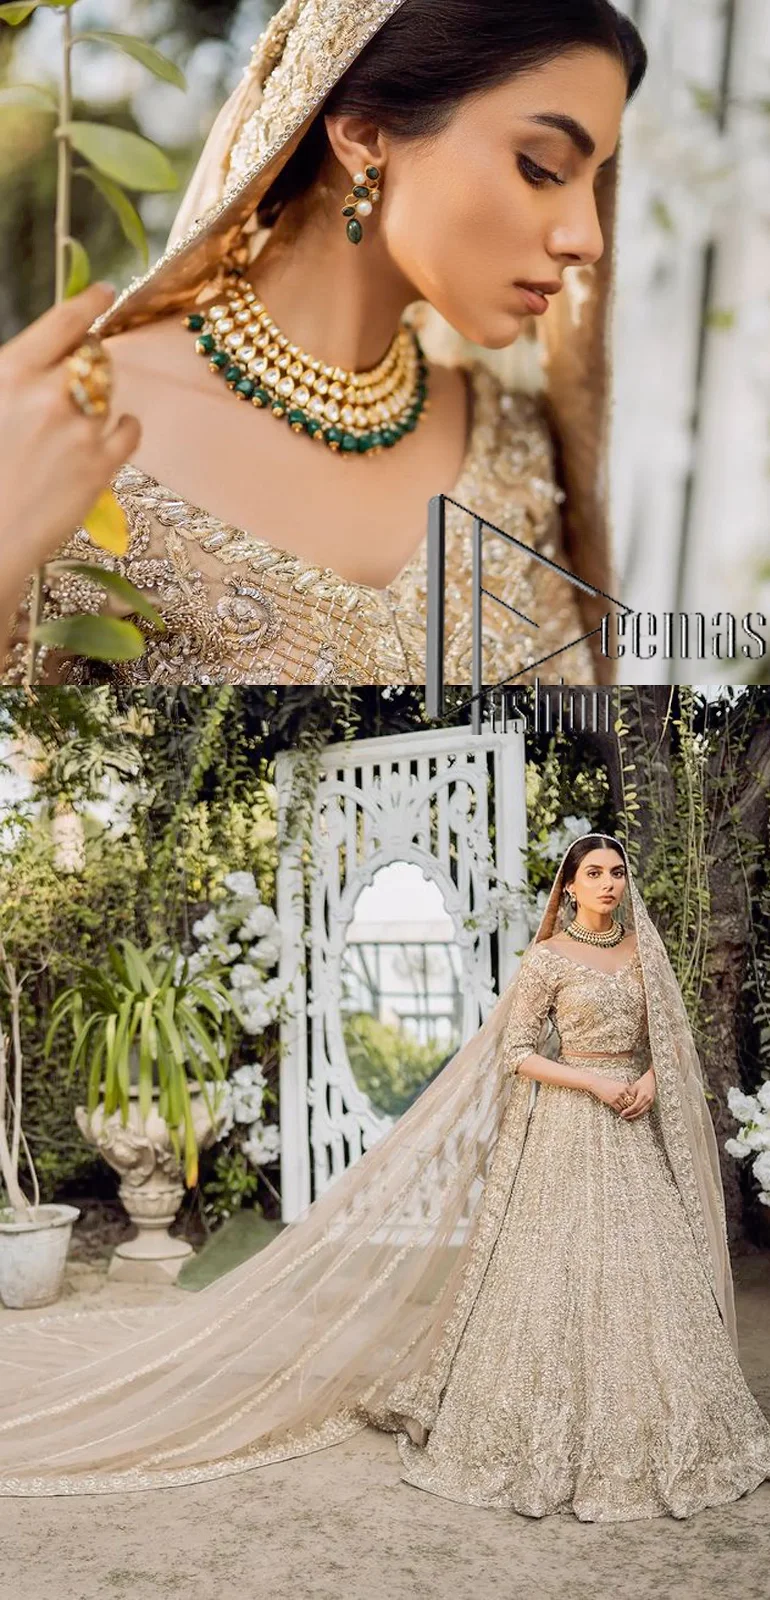 If you are getting married, you need a quality outfit. So, DeemasFashion presents this nikah outfit for you in fawn colour which begins with a fawn blouse that is laboriously and meticulously hand–rendered with silver and matching embroidery. It enhances with tilla, dabka, kora and Kundan that is portraying the dreamy vibe. The V Shape neckline of the blouse is a stylish way to steal the spotlight. The Nikah outfit is paired up with a can-can lehenga which is again heavily embellished with lushly detailed embroidery. Complete this nikah outfit with a dupatta in the same colour which is beautifully ornamented with a four-sided border which is ideal for modern festives.